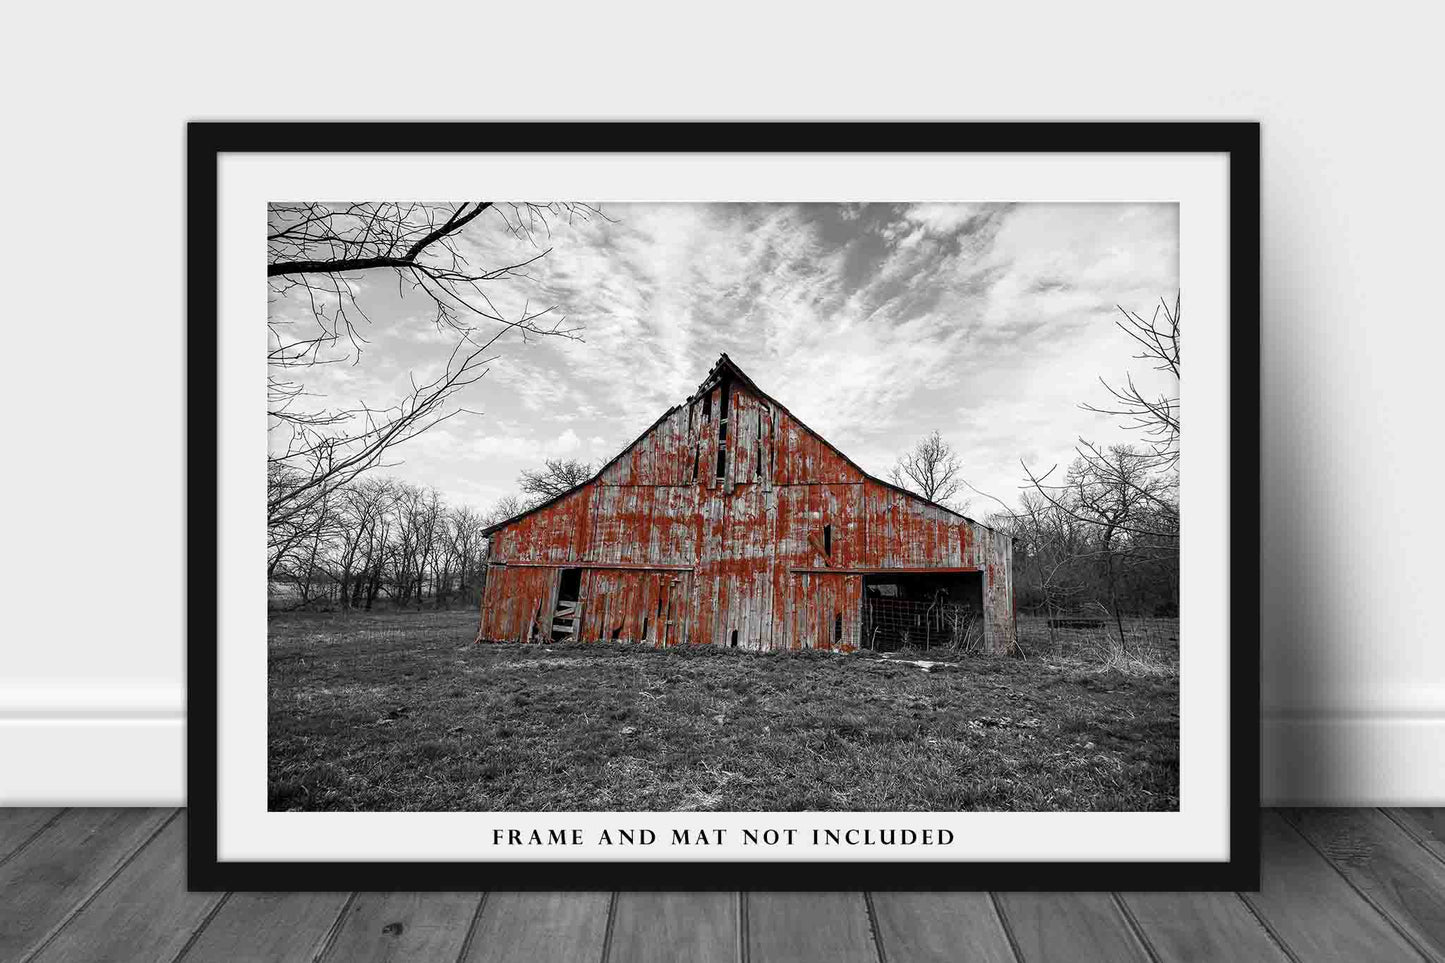 Country Wall Art Photography Print - Picture of Rustic Red Barn with Worn Paint in Missouri - Unframed Farmhouse Photo Artwork Decor